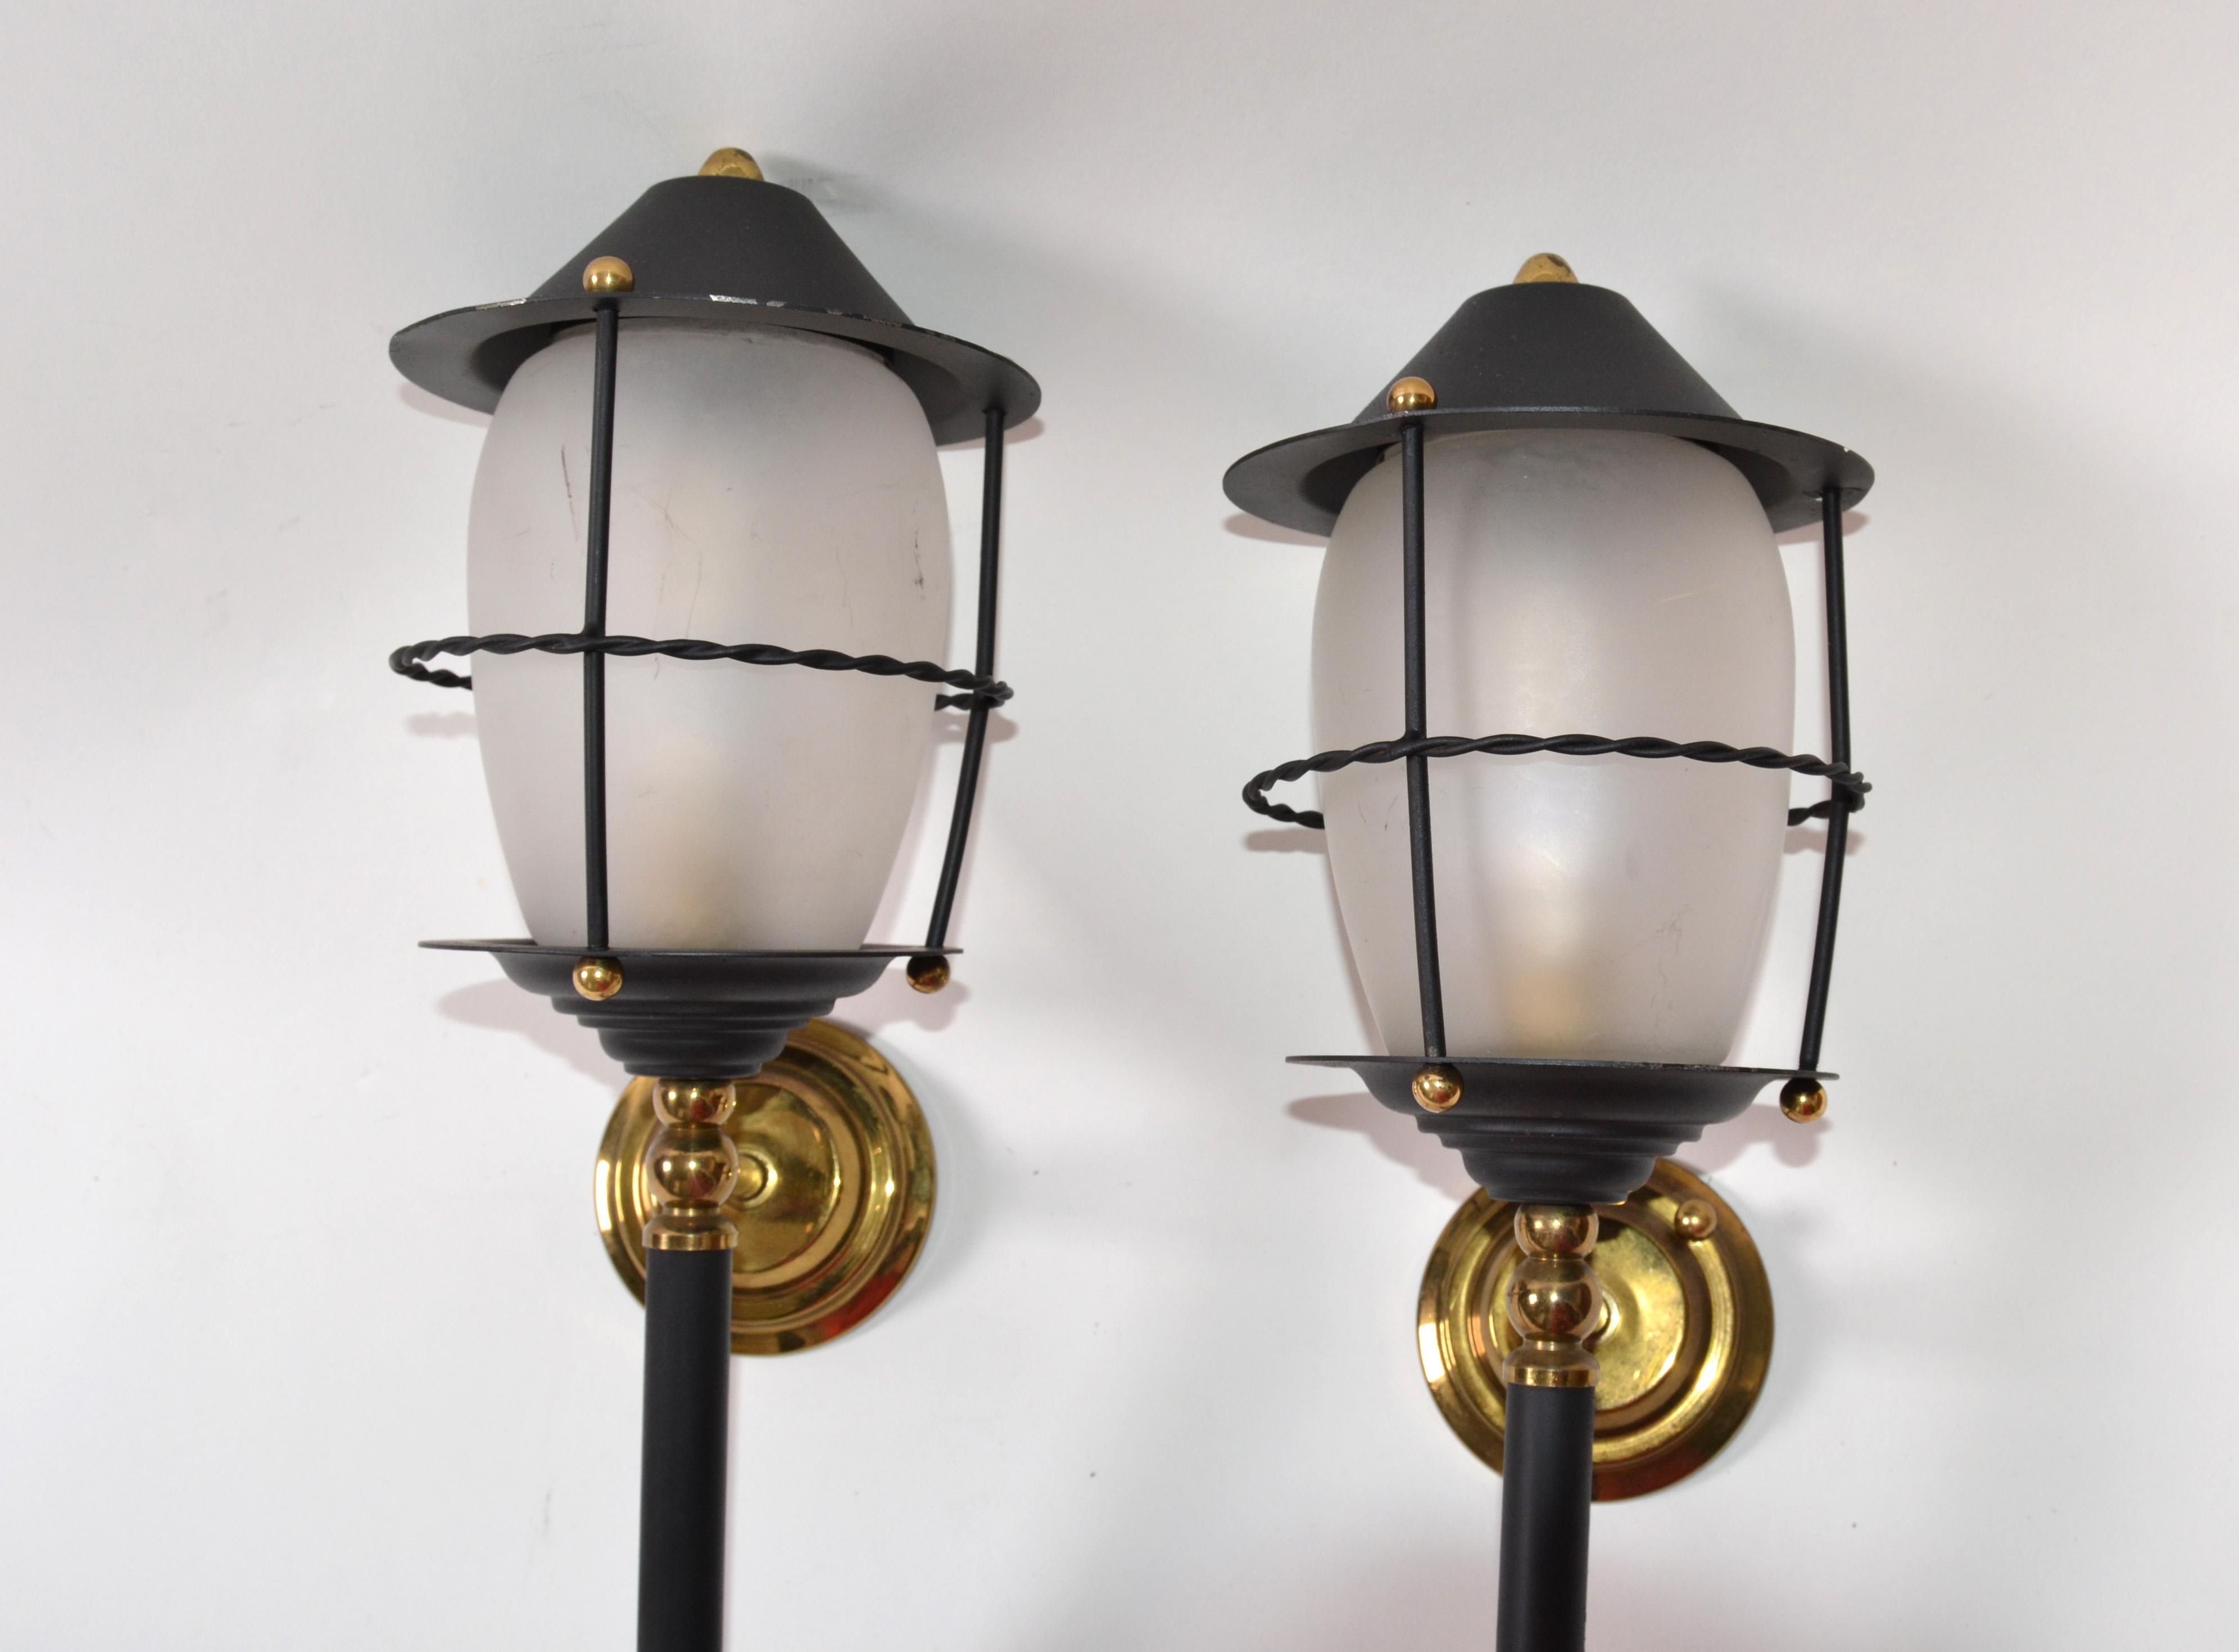 French Maison Lunel Pair of Black Glass and Brass Lantern Wall Mounted Sconces France